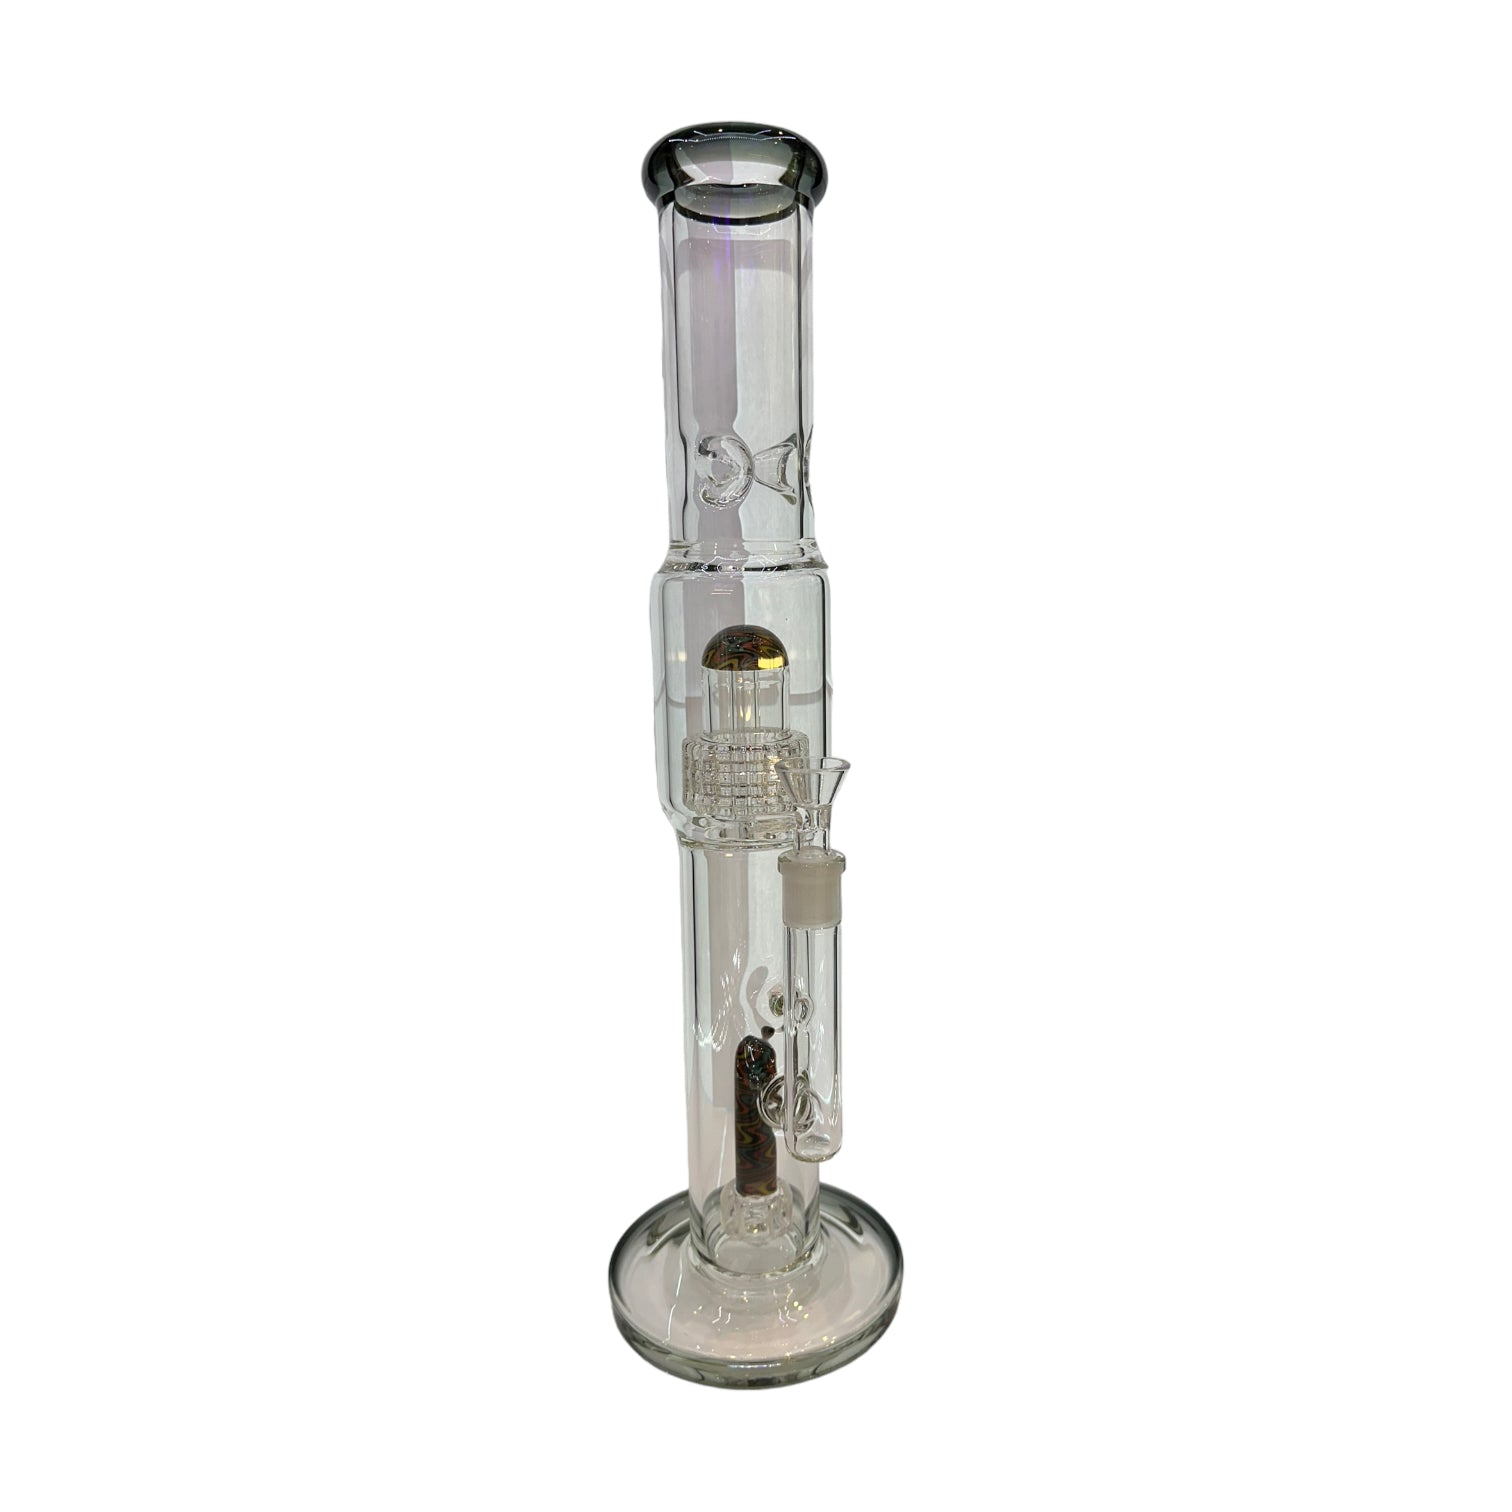 14" Wig Wag Tube with Perc